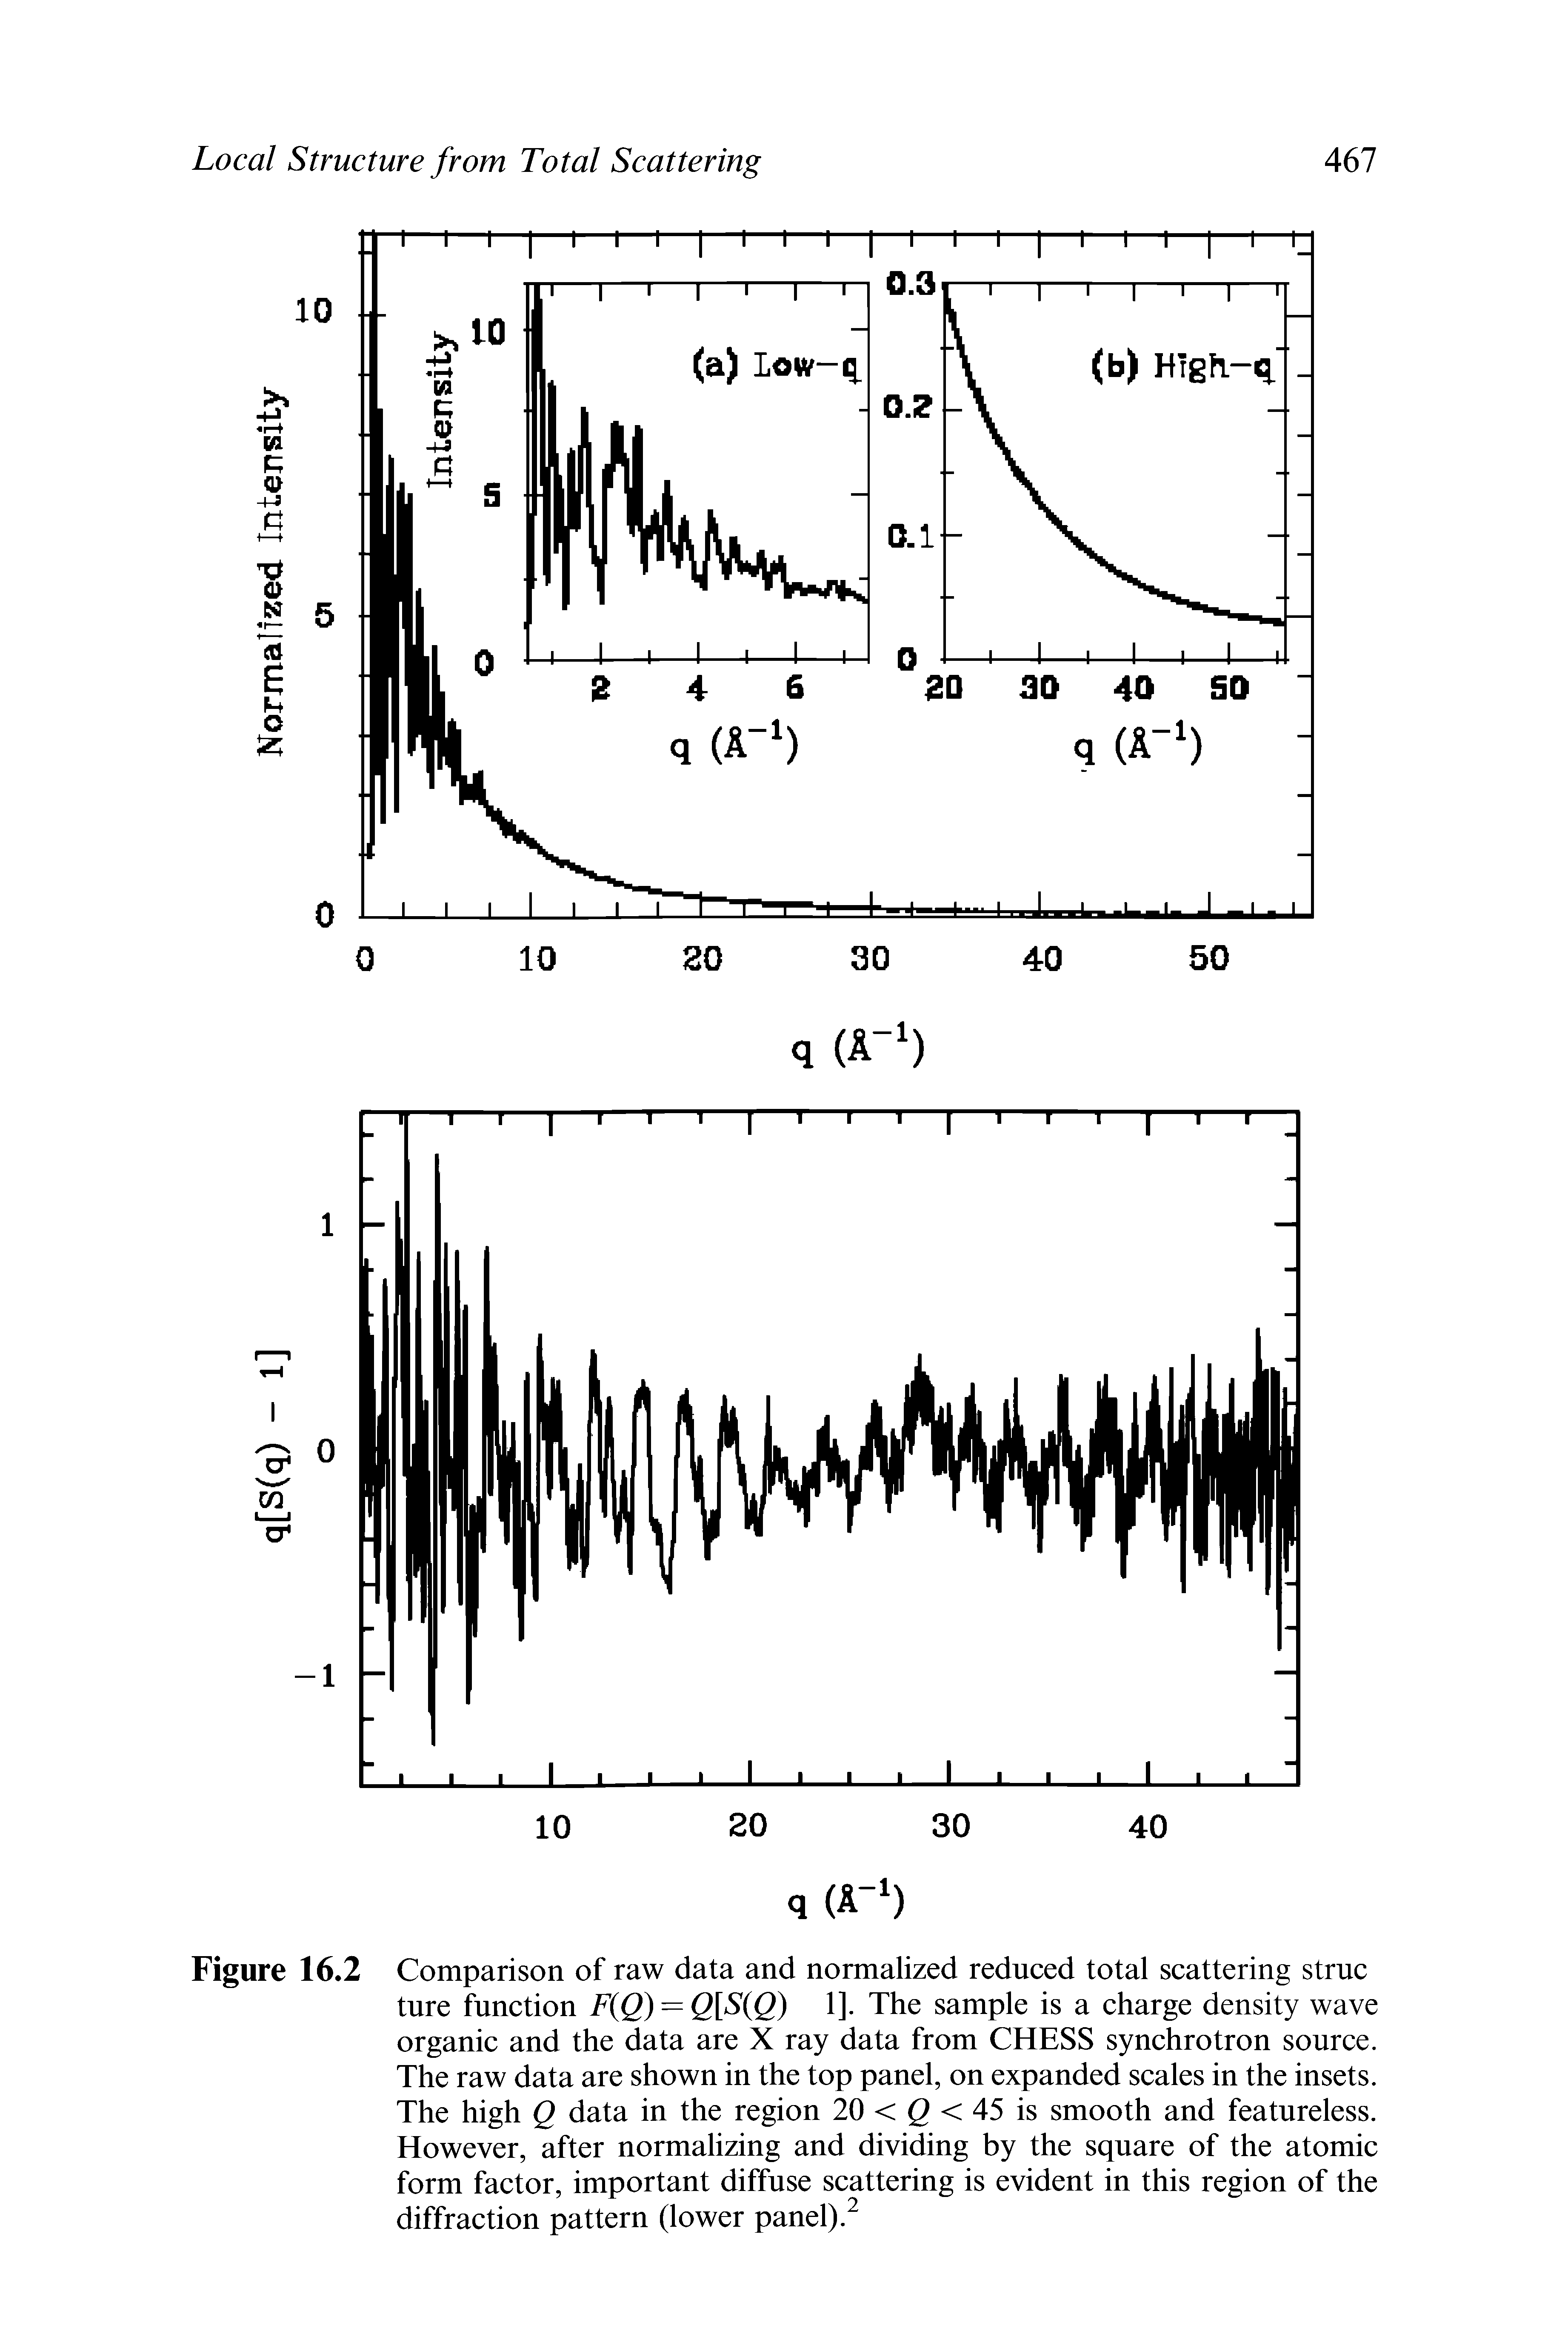 Figure 16.2 Comparison of raw data and normalized reduced total scattering struc ture function F Q) = Q[S(Q) 1]. The sample is a charge density wave organic and the data are X ray data from CHESS synchrotron source. The raw data are shown in the top panel, on expanded scales in the insets. The high Q data in the region 20 < g < 45 is smooth and featureless. However, after normalizing and dividing by the square of the atomic form factor, important diffuse scattering is evident in this region of the diffraction pattern (lower panel). ...